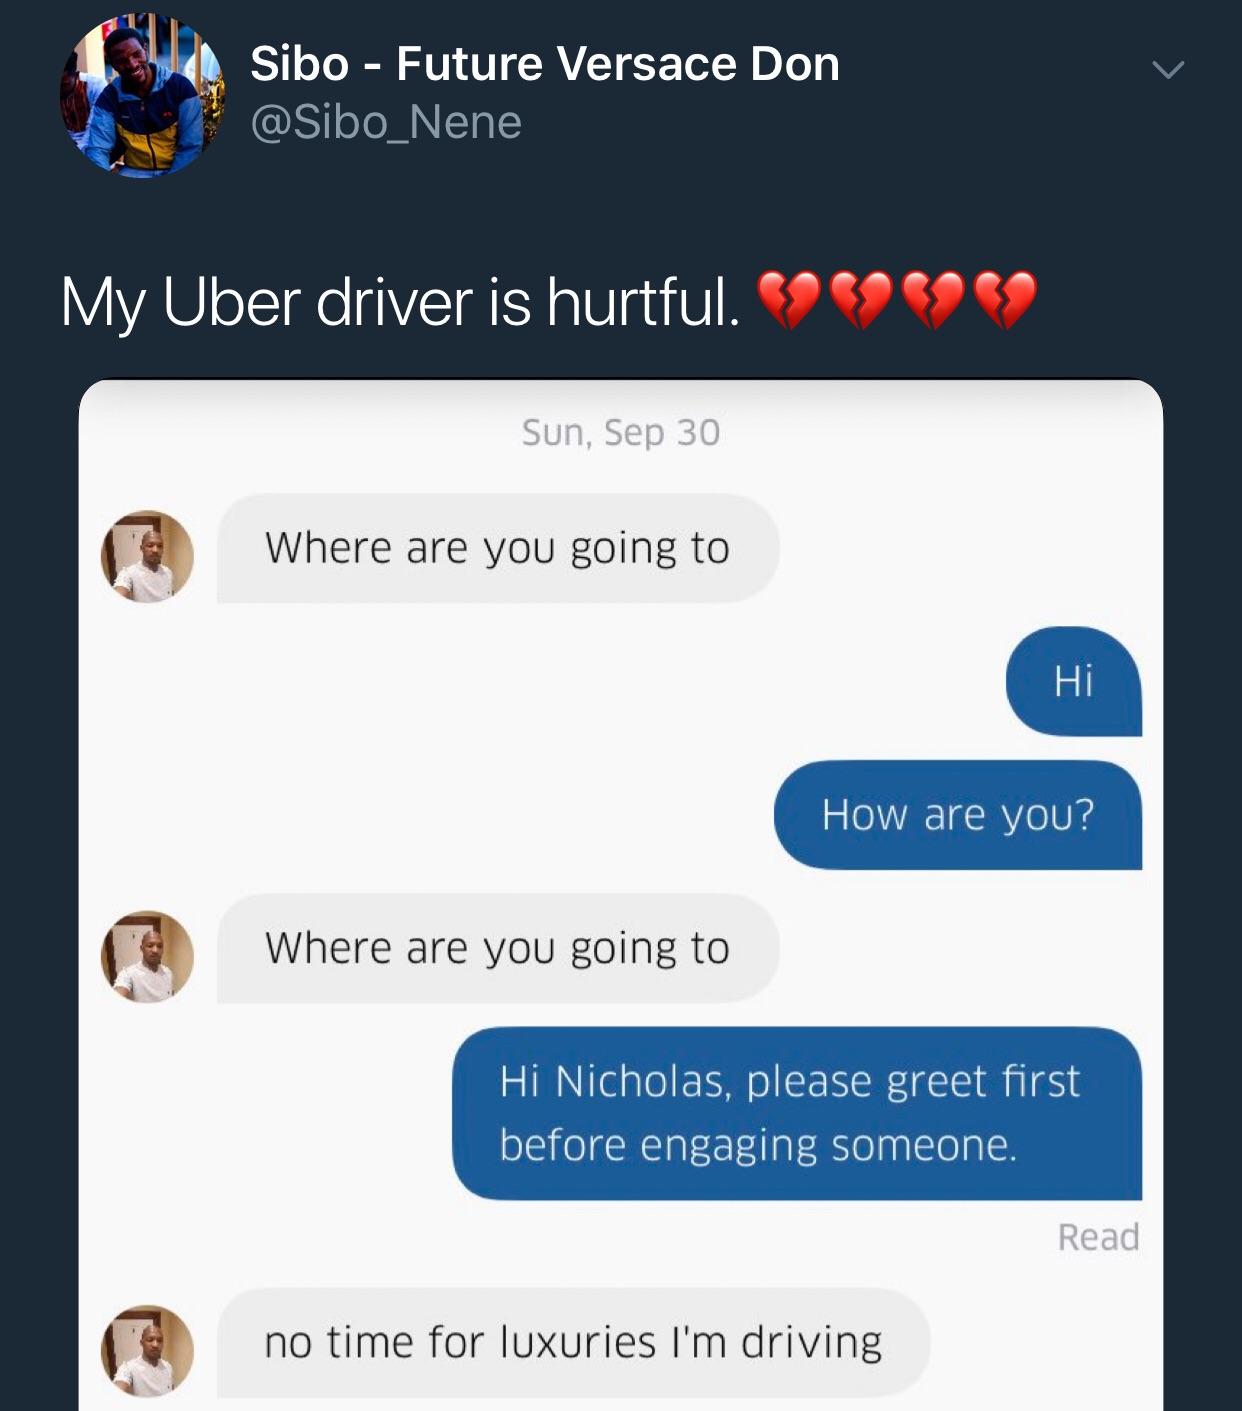 software - Sibo Future Versace Don My Uber driver is hurtful. SOCO9 59 Sun, Sep 30 Where are you going to Hi How are you? Where are you going to Hi Nicholas, please greet first before engaging someone. Read no time for luxuries I'm driving